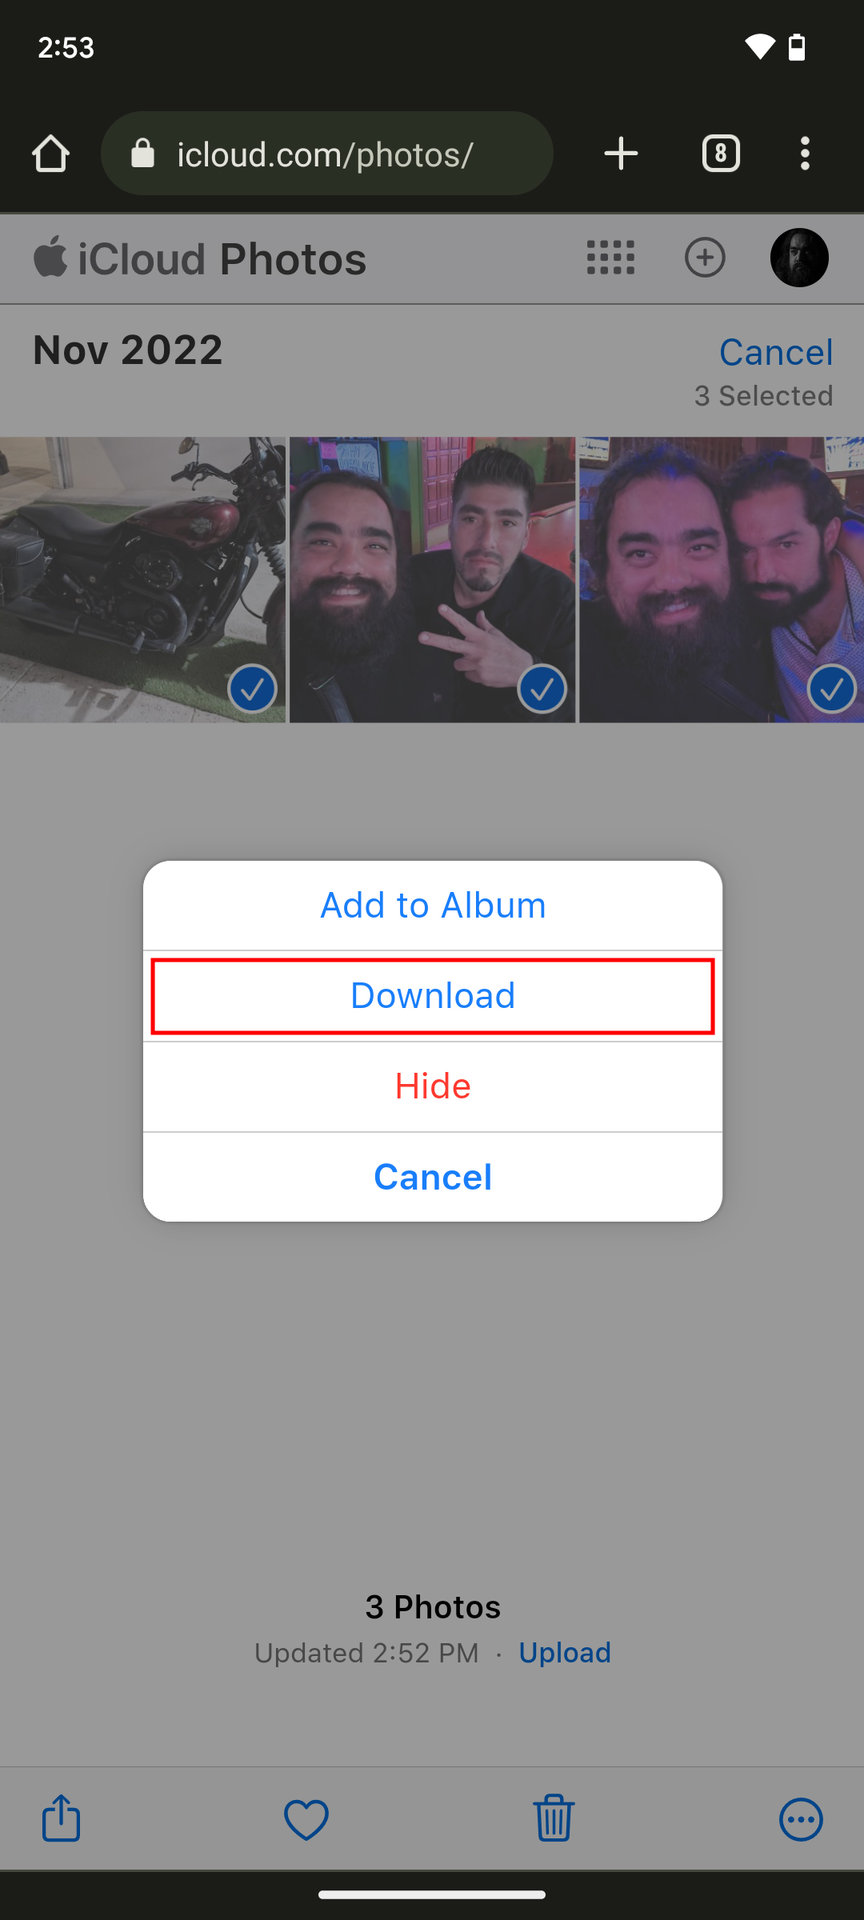 Transfer photos from iPhone to Android using iCloud 3